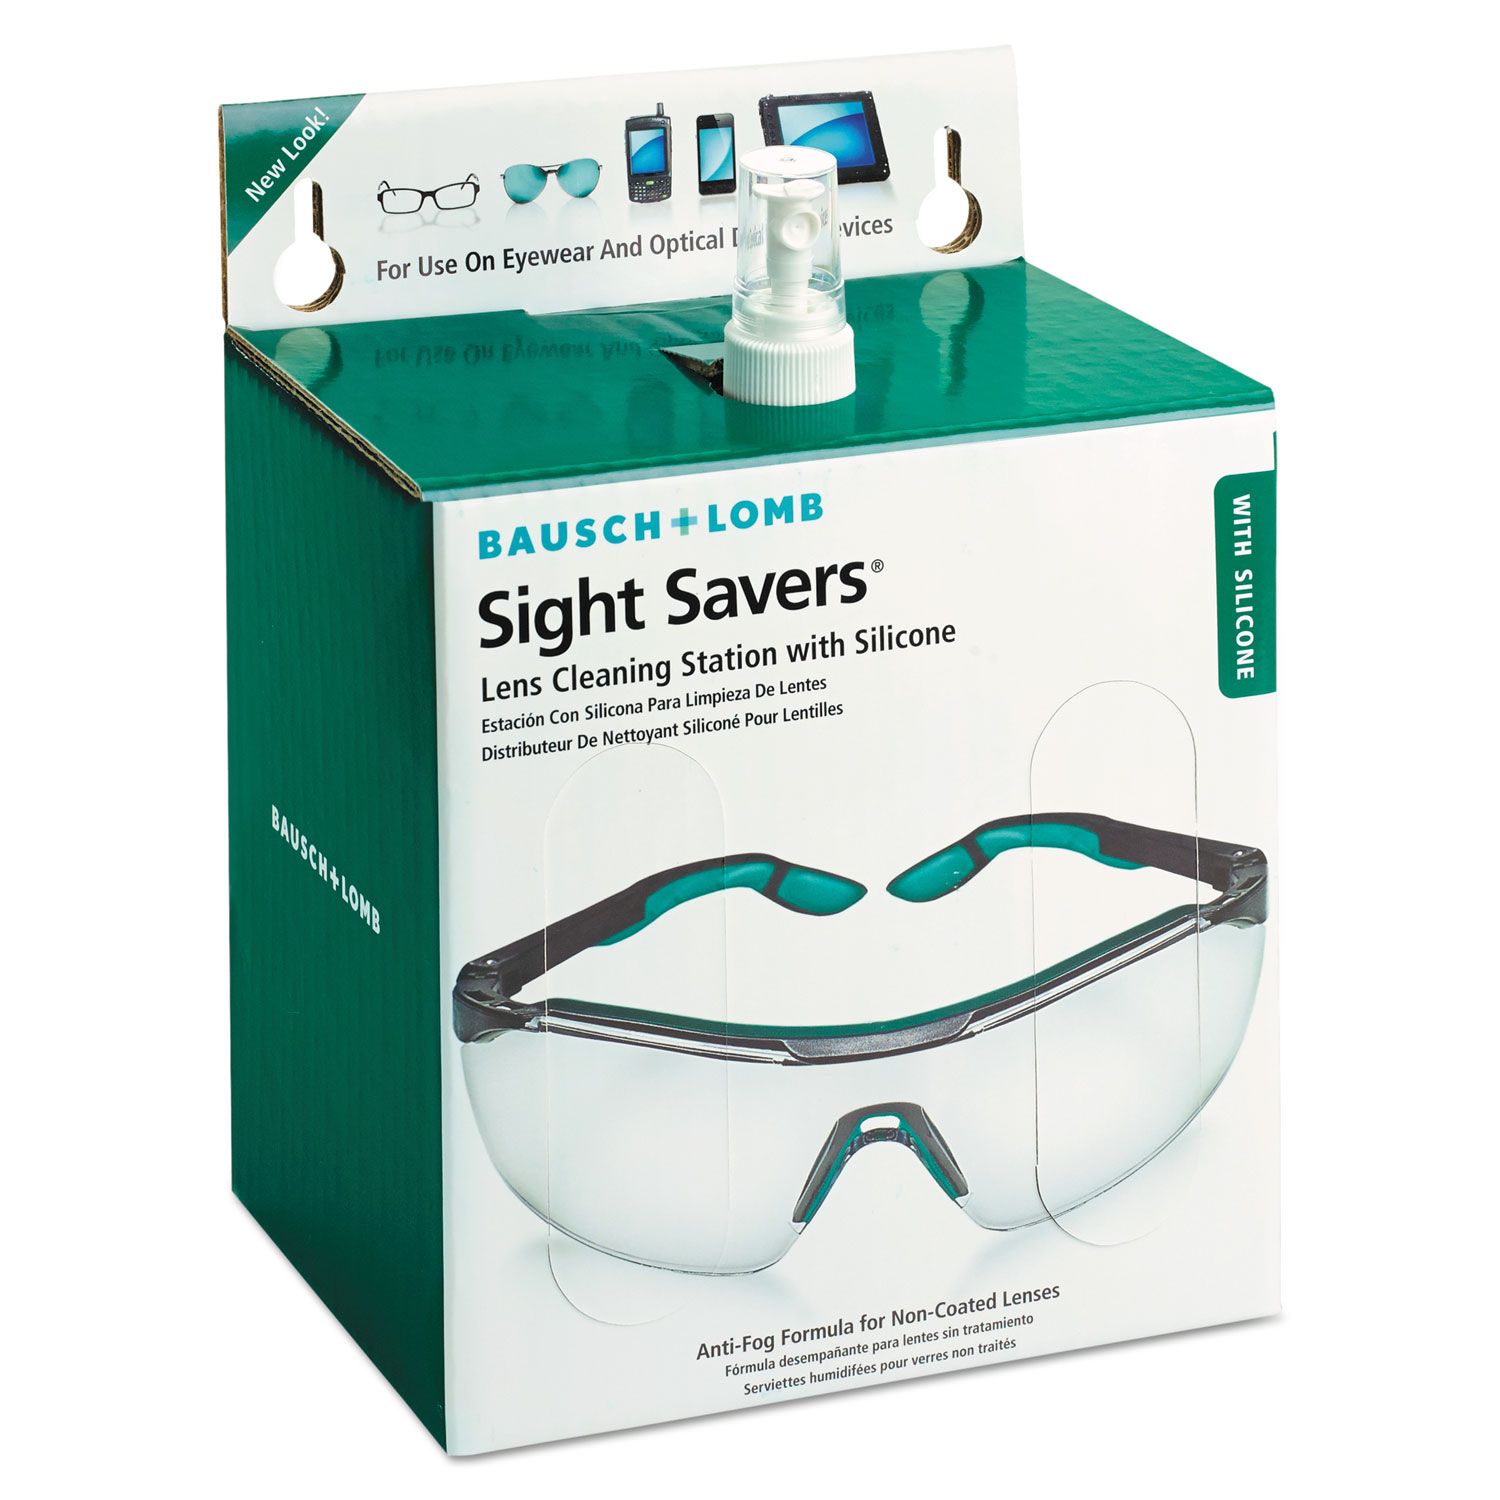  Bausch & Lomb 8565 Sight Savers Lens Cleaning Station, 6 1/2 x 4 3/4 Tissues (BAL8565) 